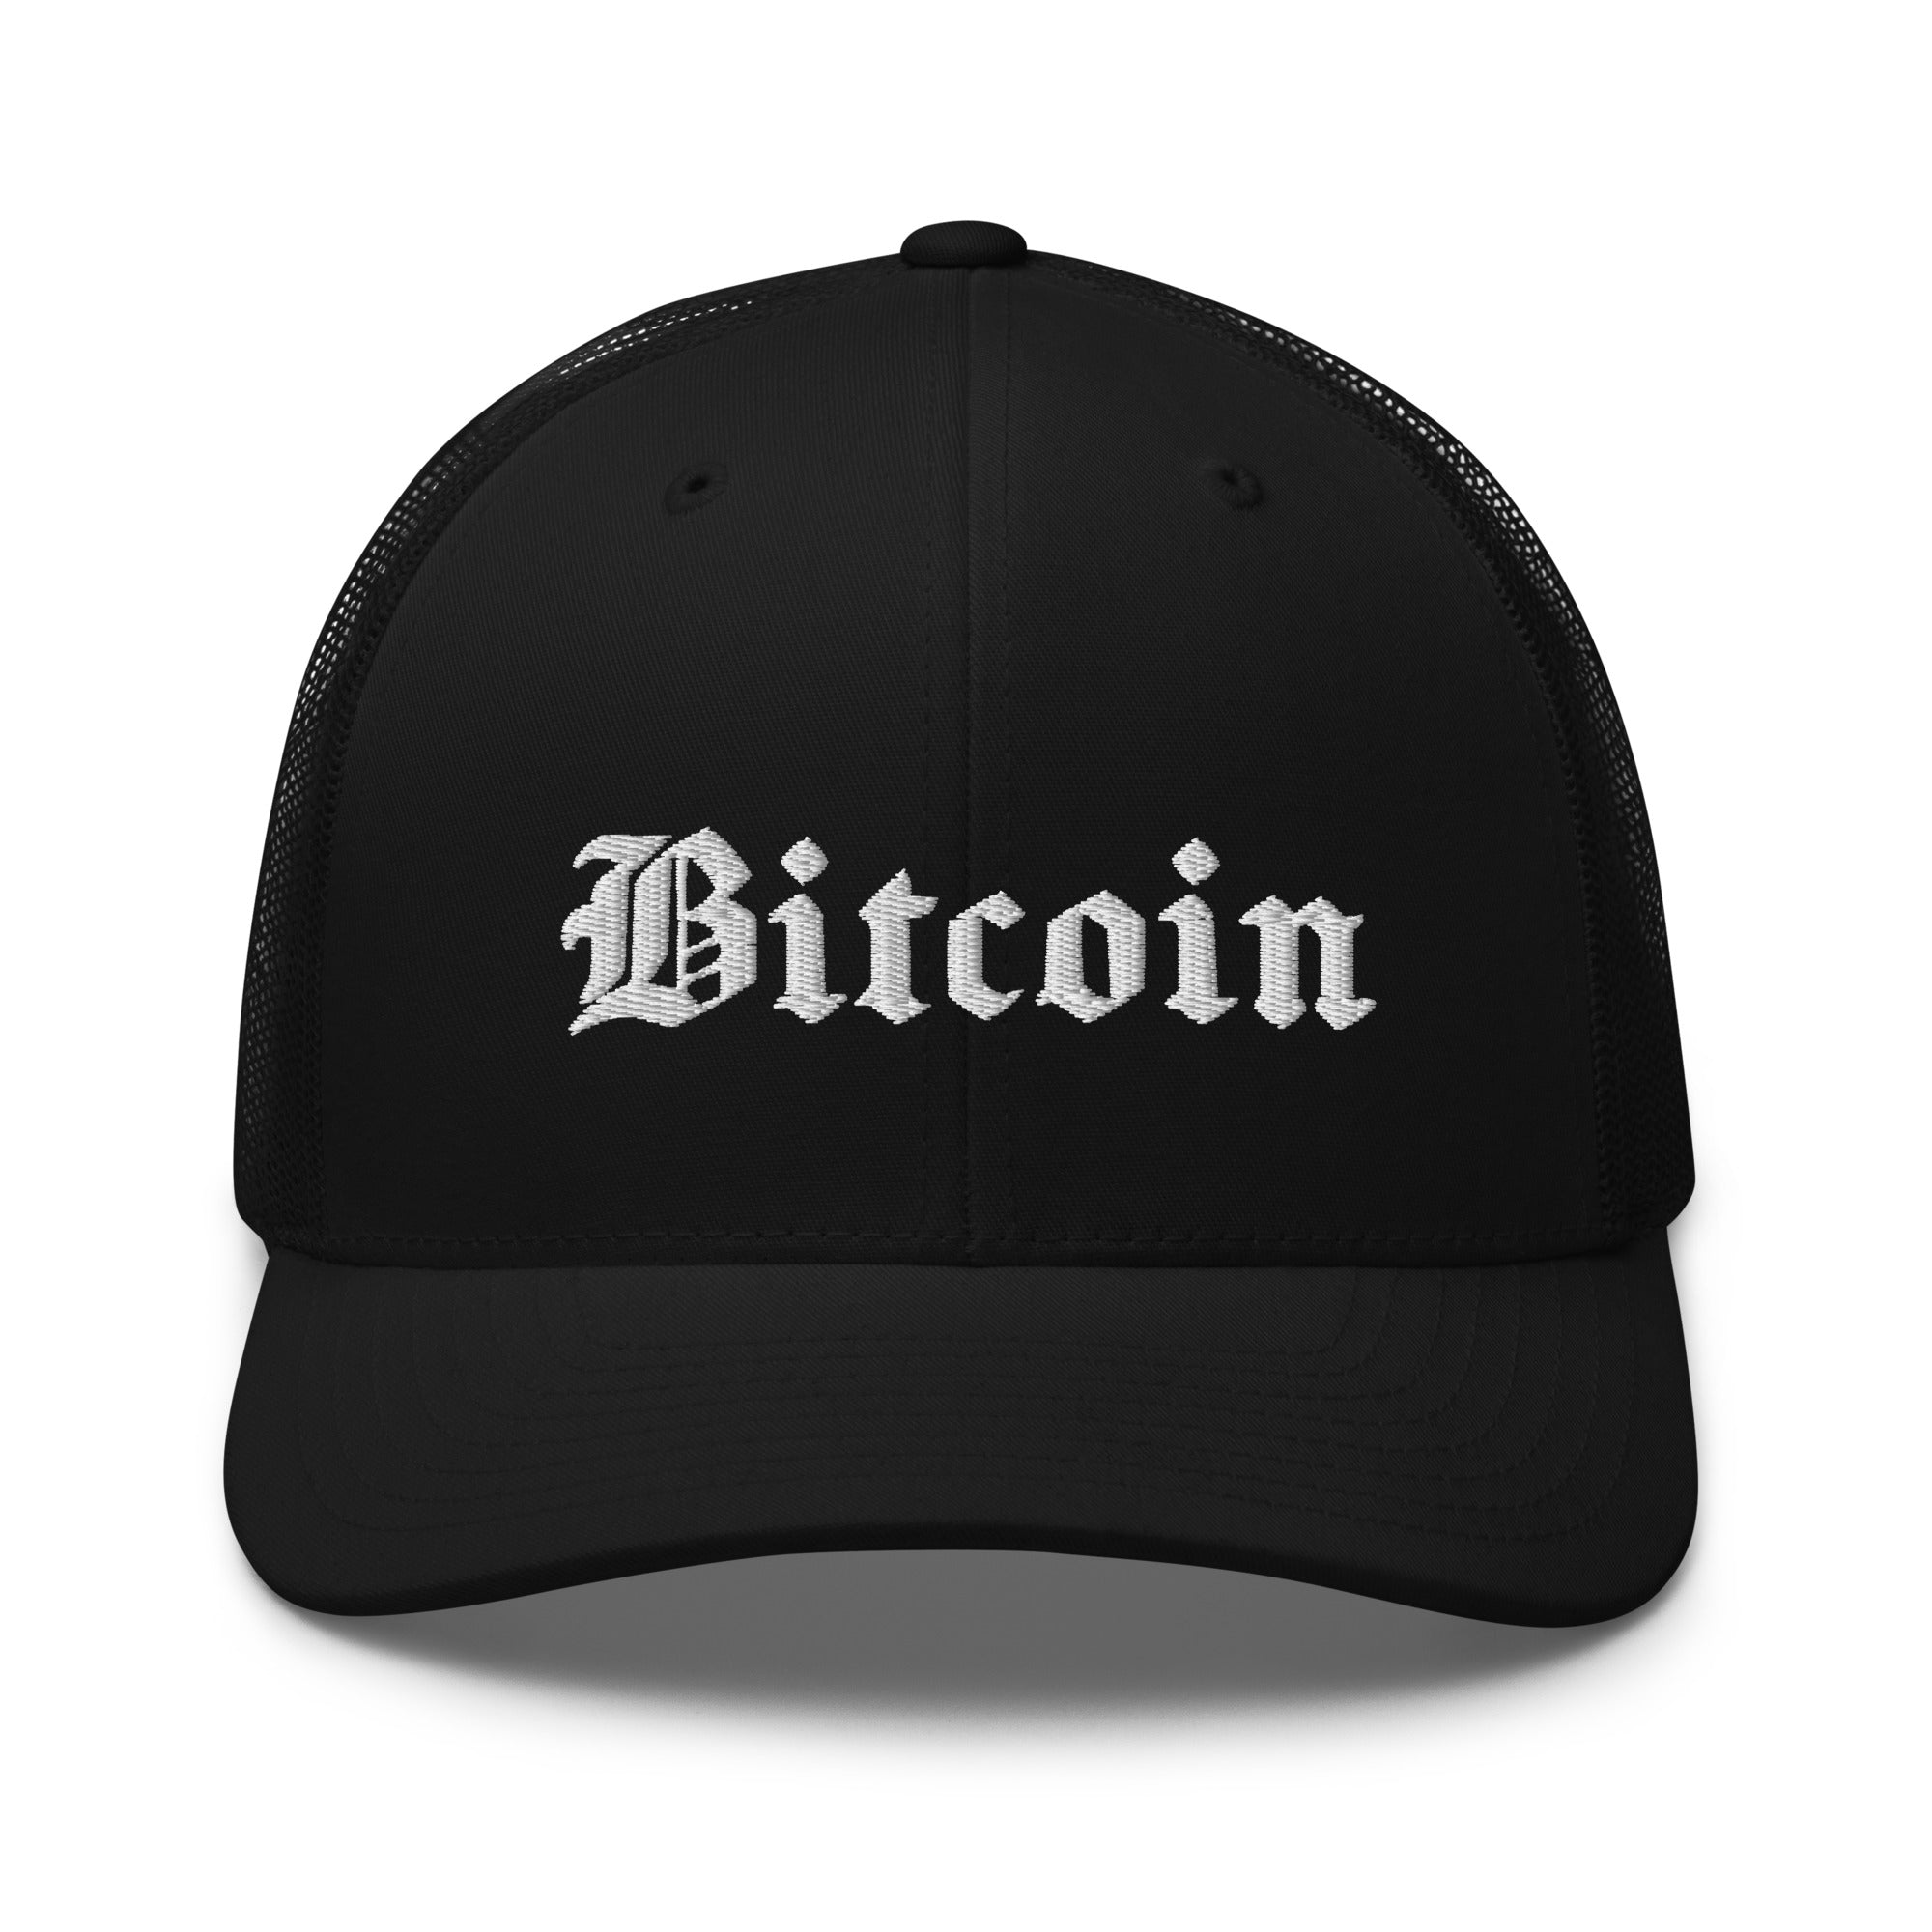 Bitcoin Hat - The Bitcoin Gothic Trucker Hat features a Gothic script design on a black cap. Front view.